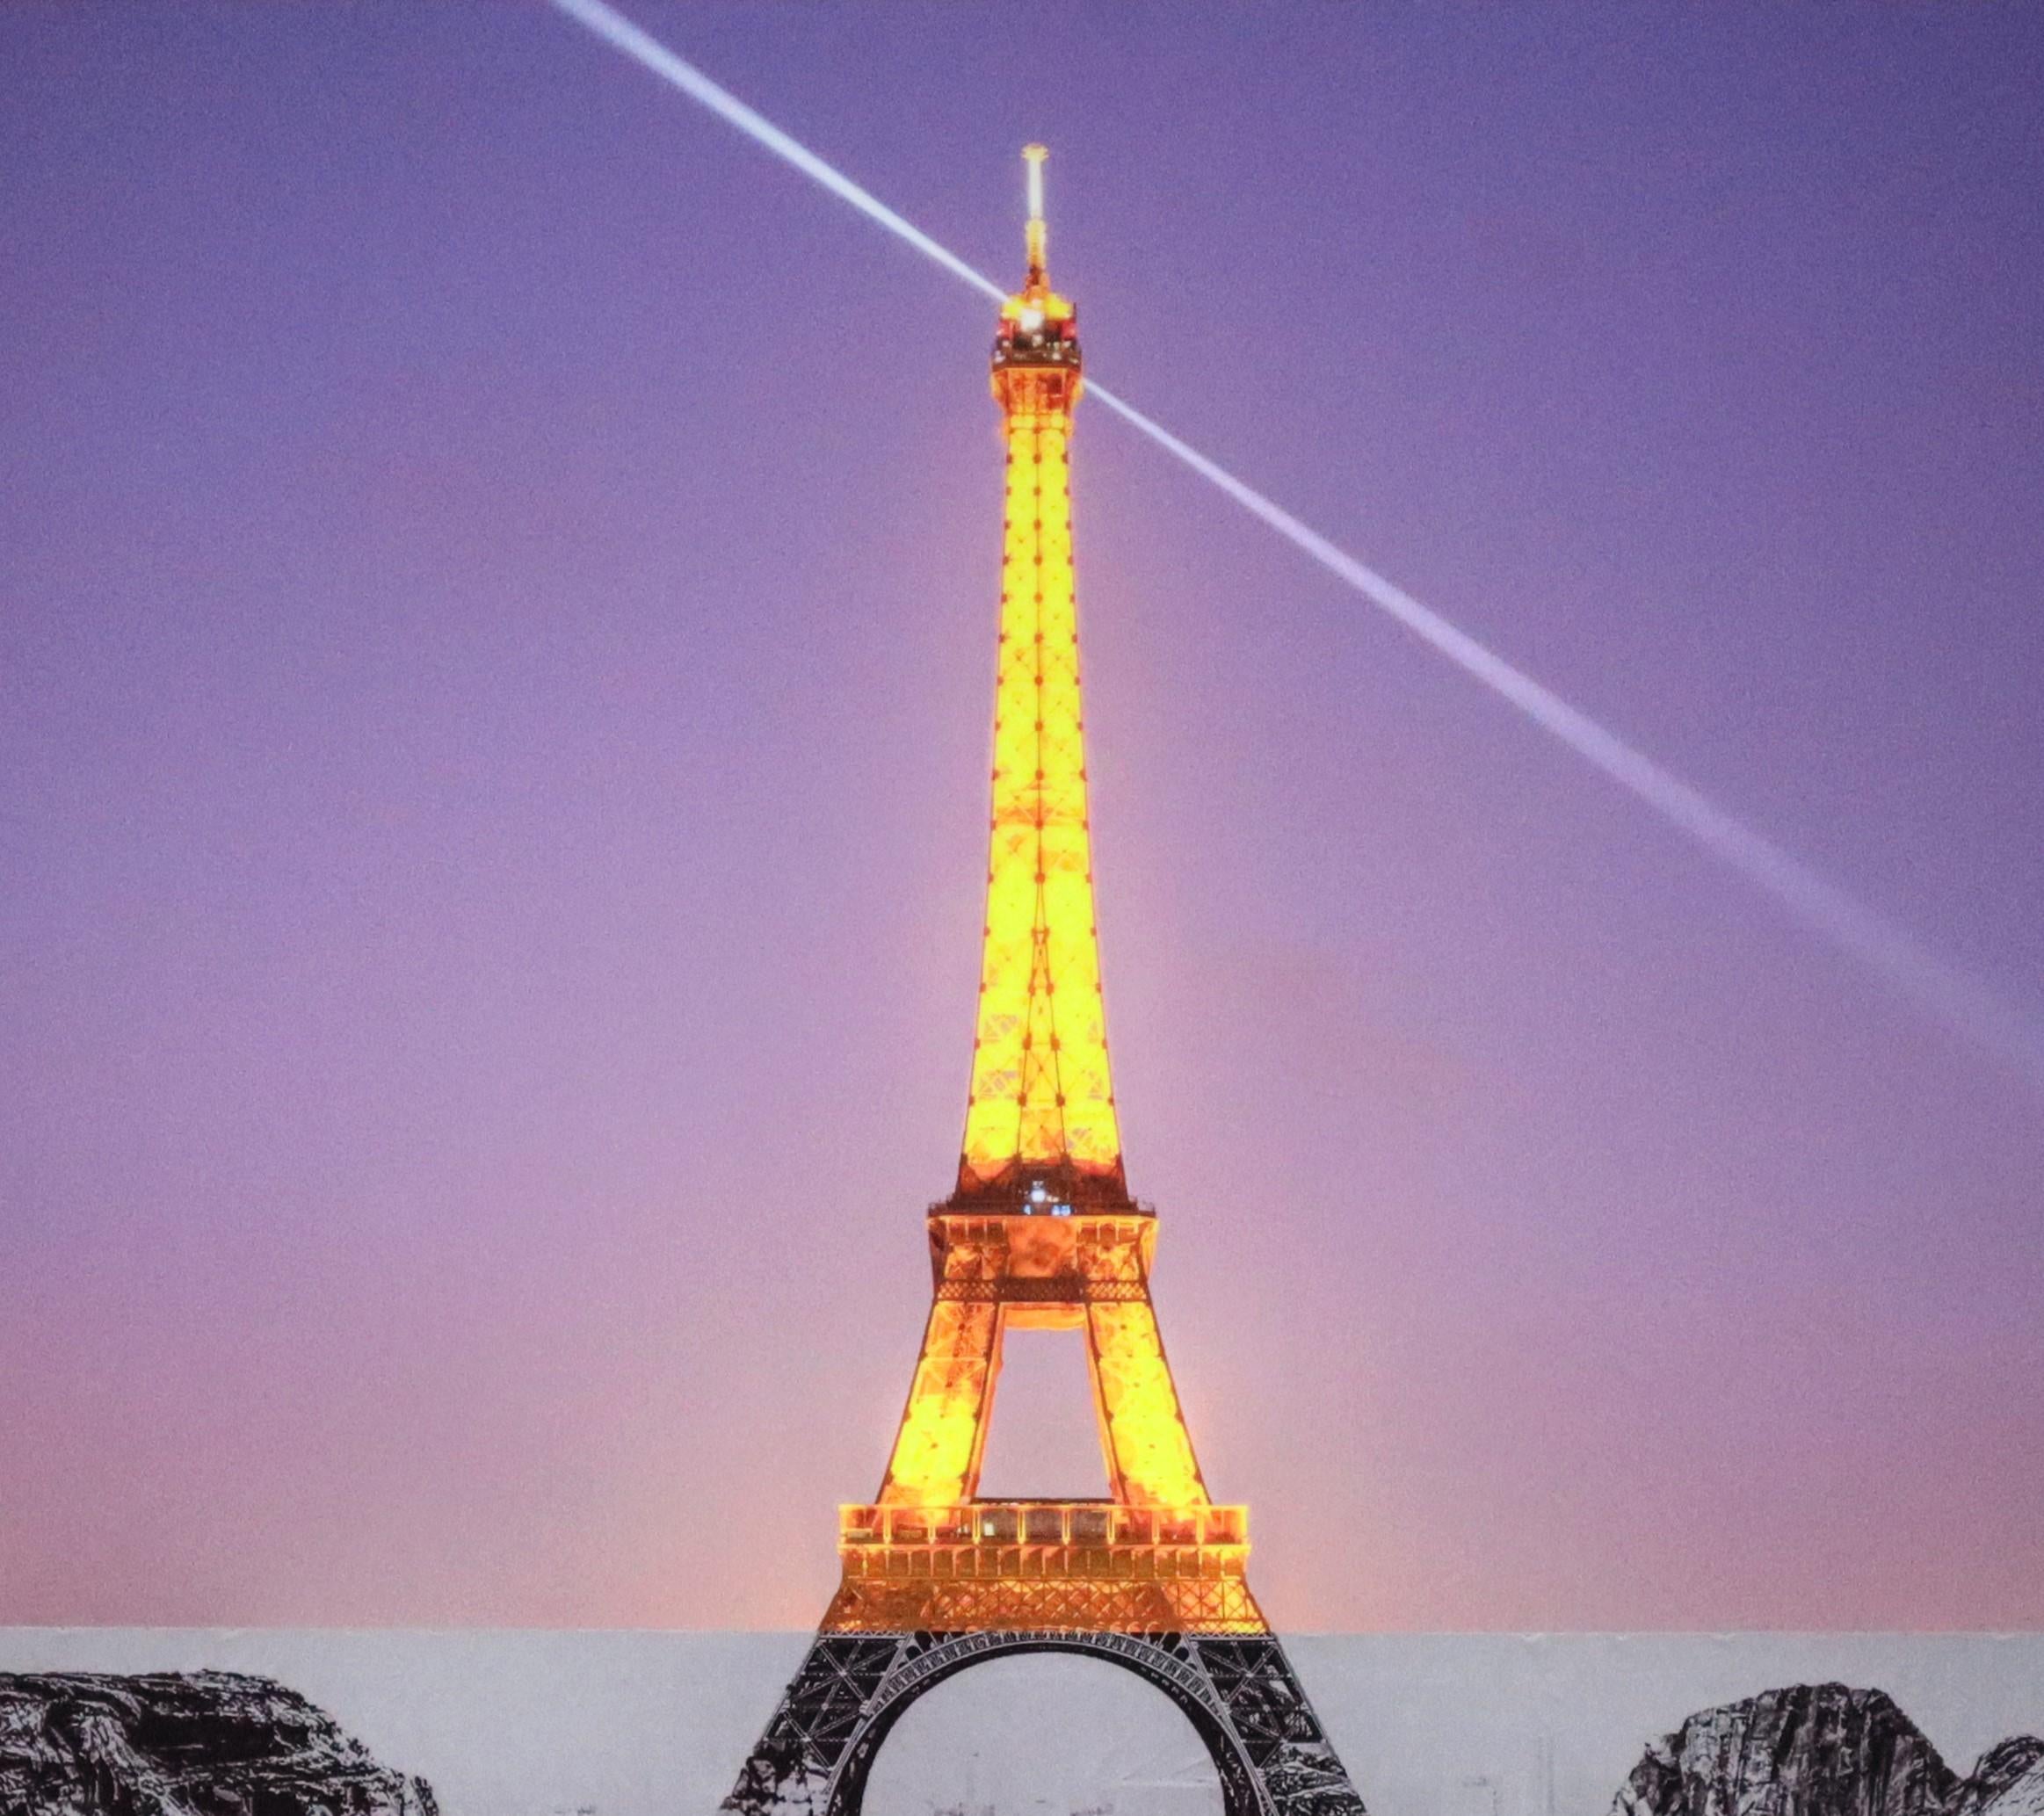 JR
Trompe l'oeil, Les Falaises du Trocadéro, 25 mai 2021, 22h18, Paris, France, 2021
2021
Giclée Print Laminated with G-gloss, Mounted on 3mm Dibond
64 × 96 cm
(25.2 × 37.8 in)
In mint condition
Edition of 472
Signed by JR on the bottom right corner